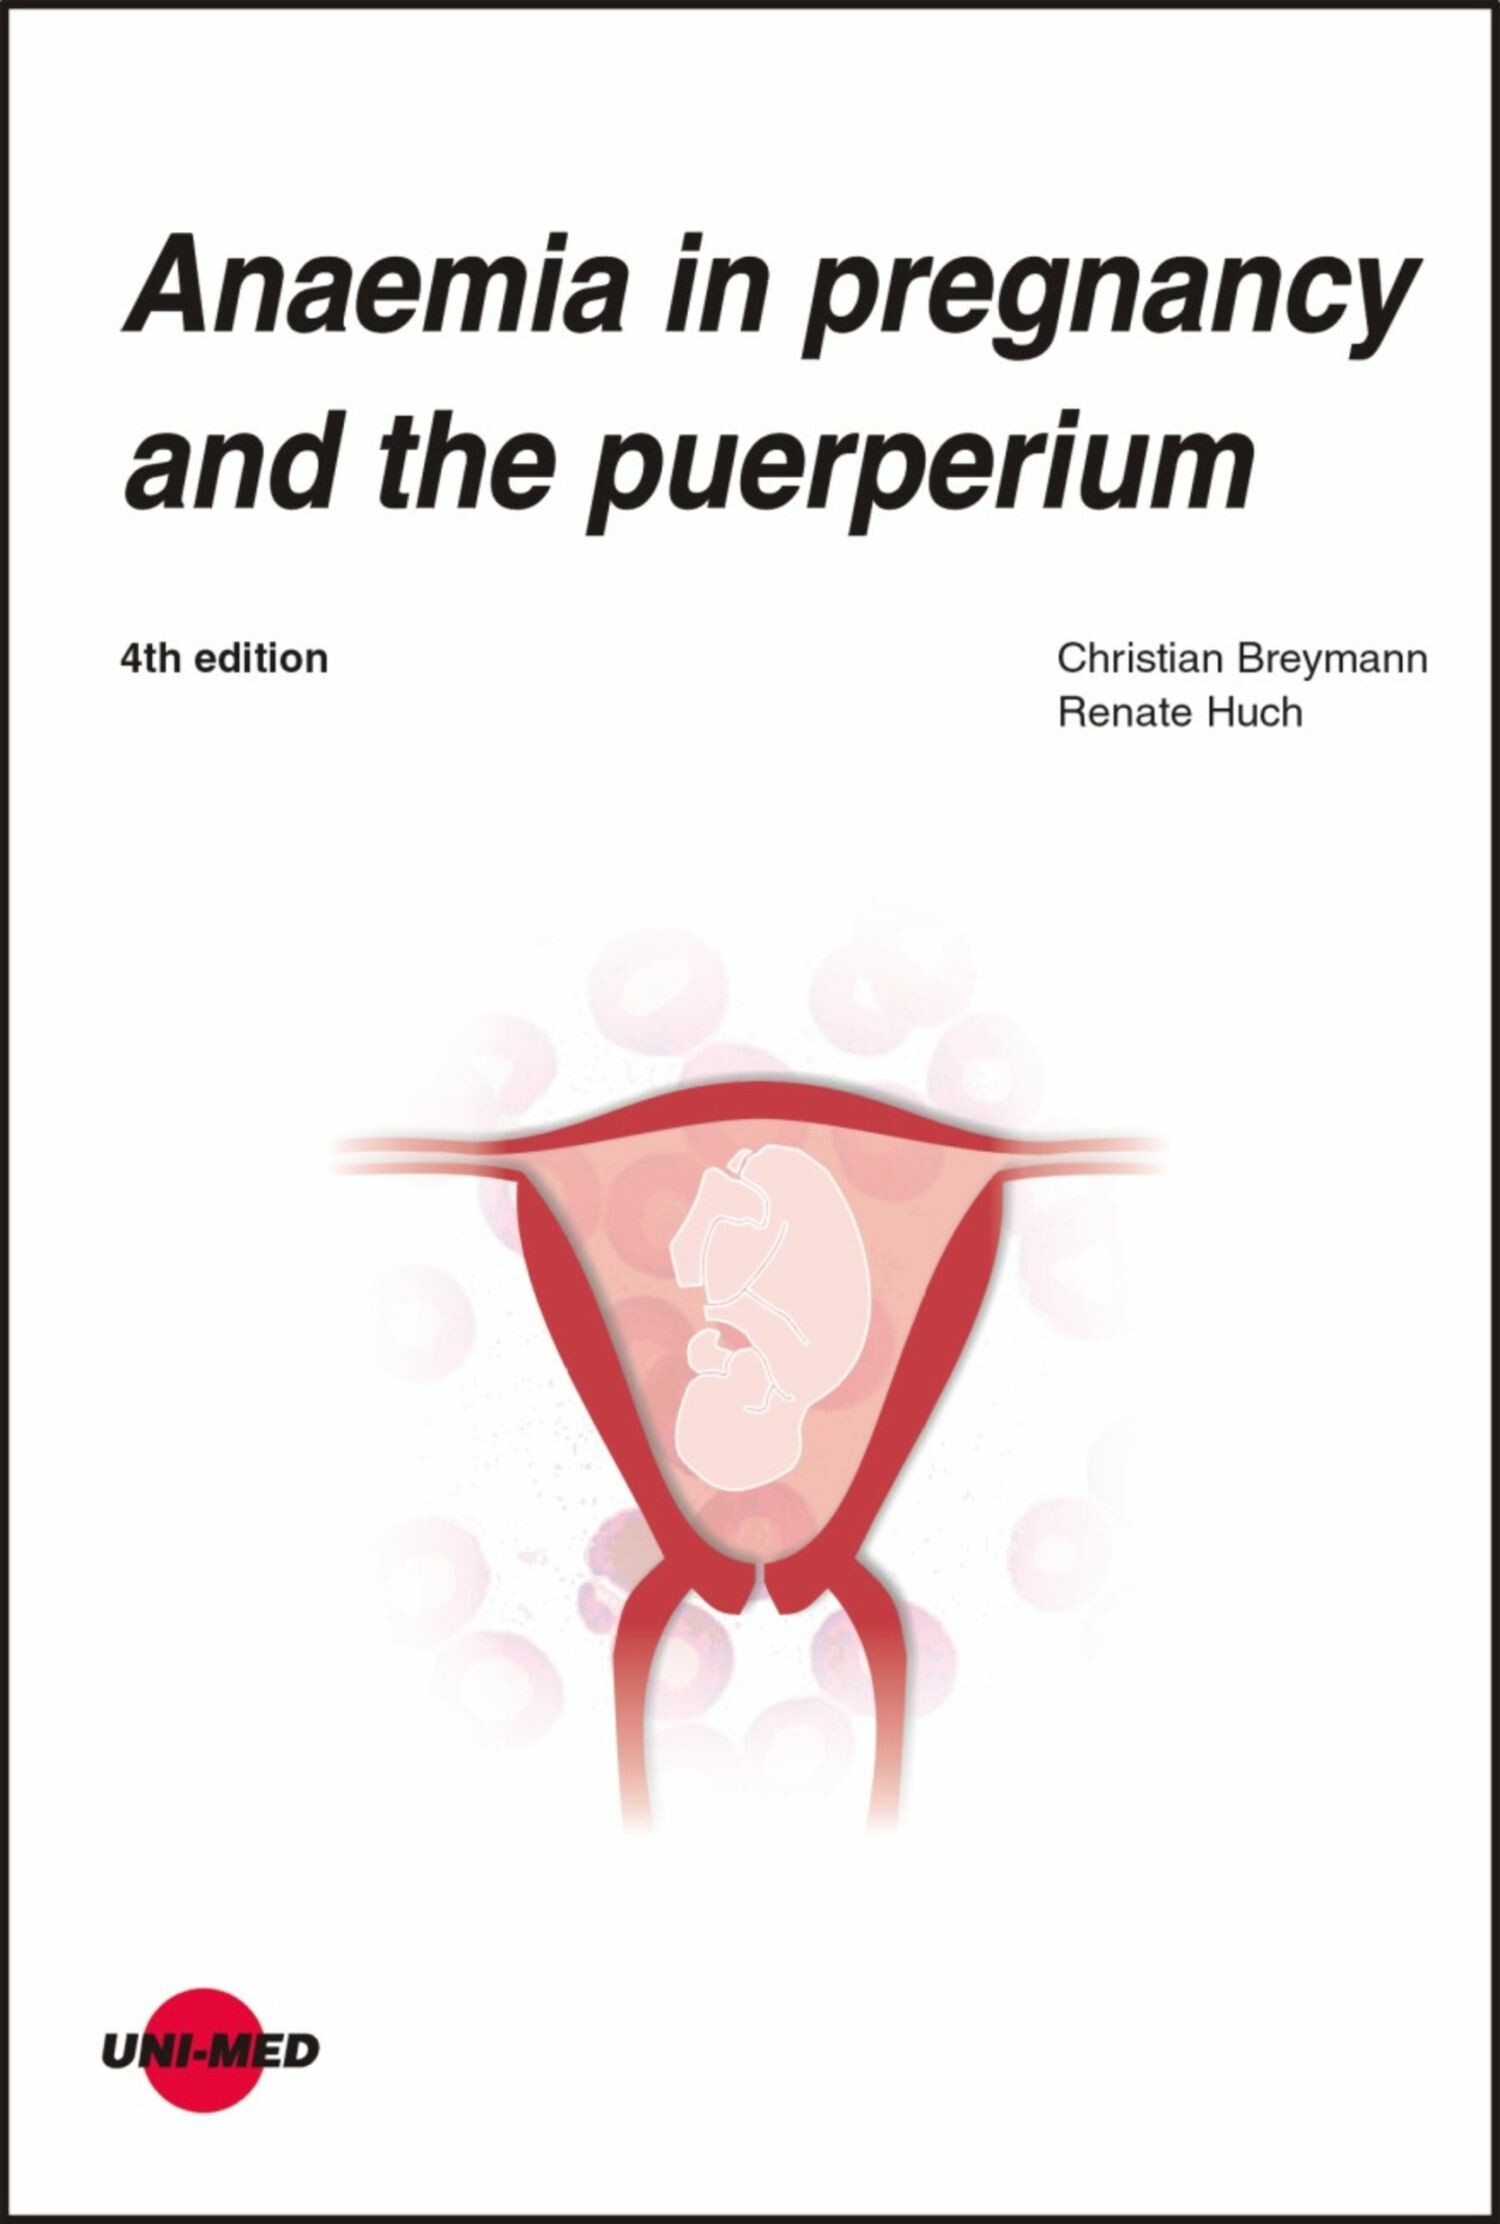 Anaemia in pregnancy and the puerperium